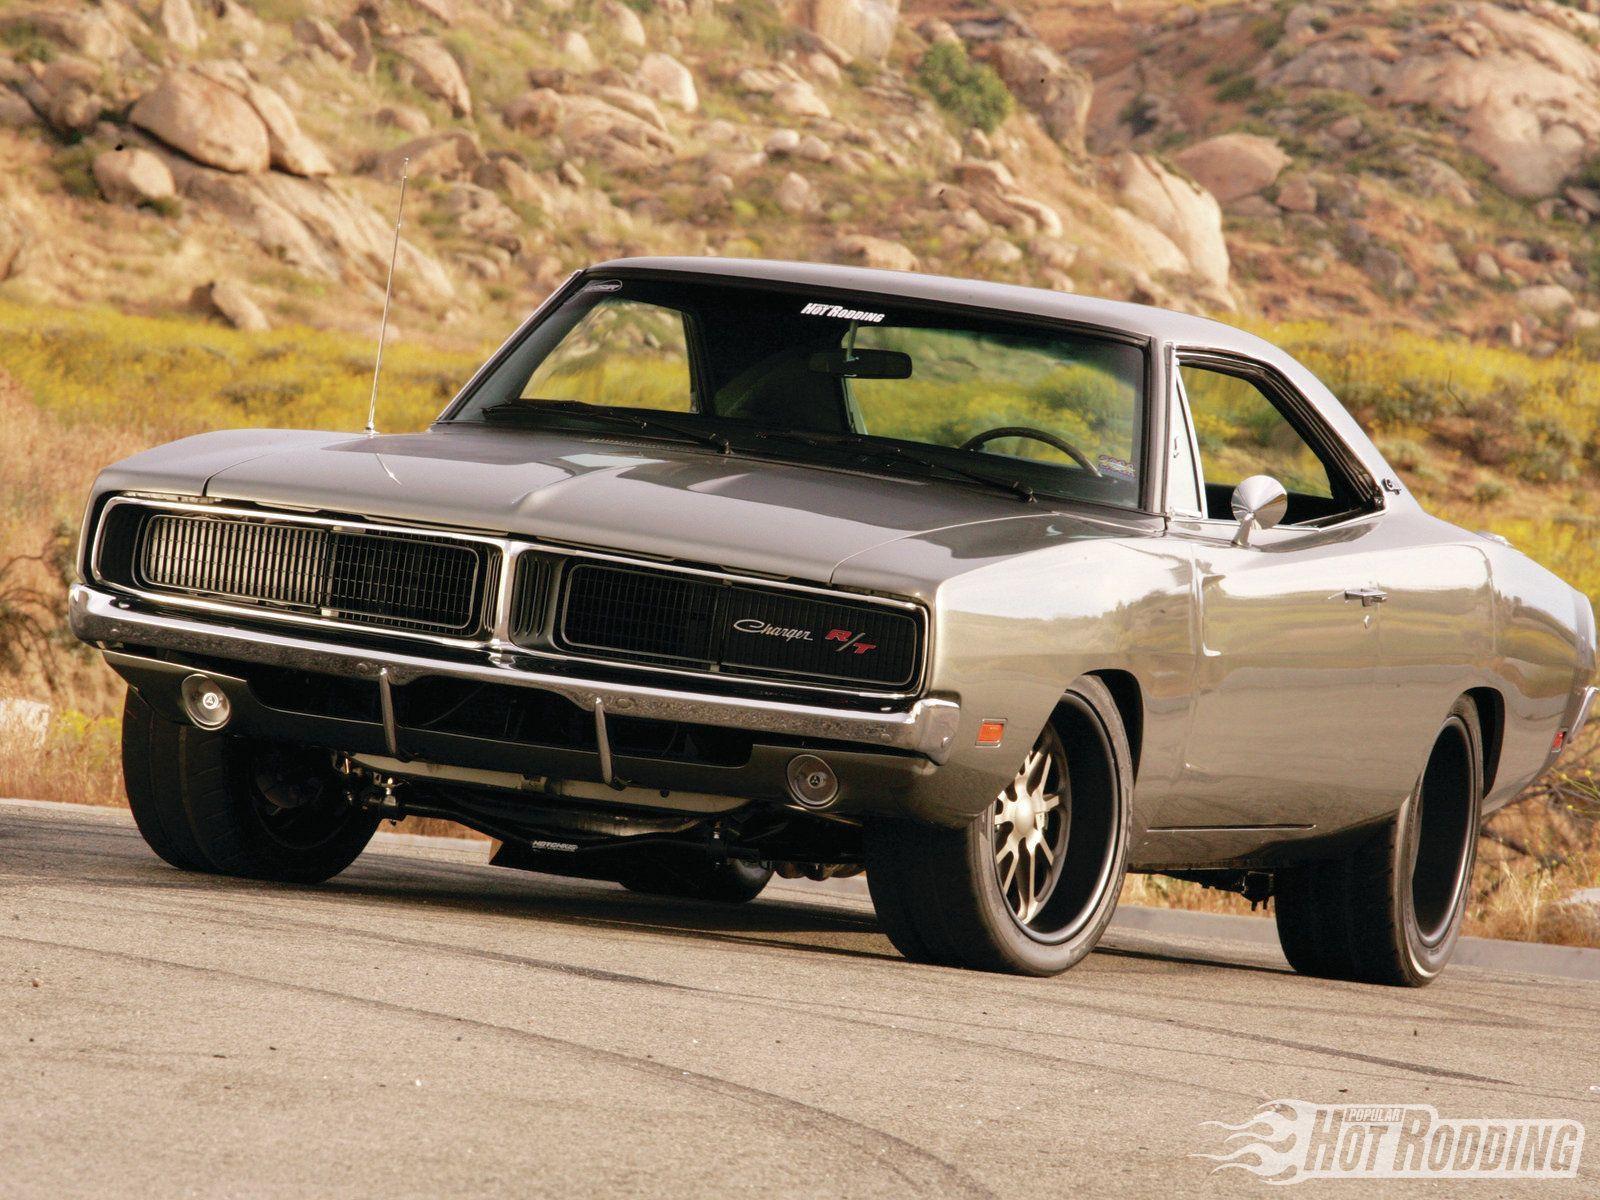 Dodge Charger Wallpaper